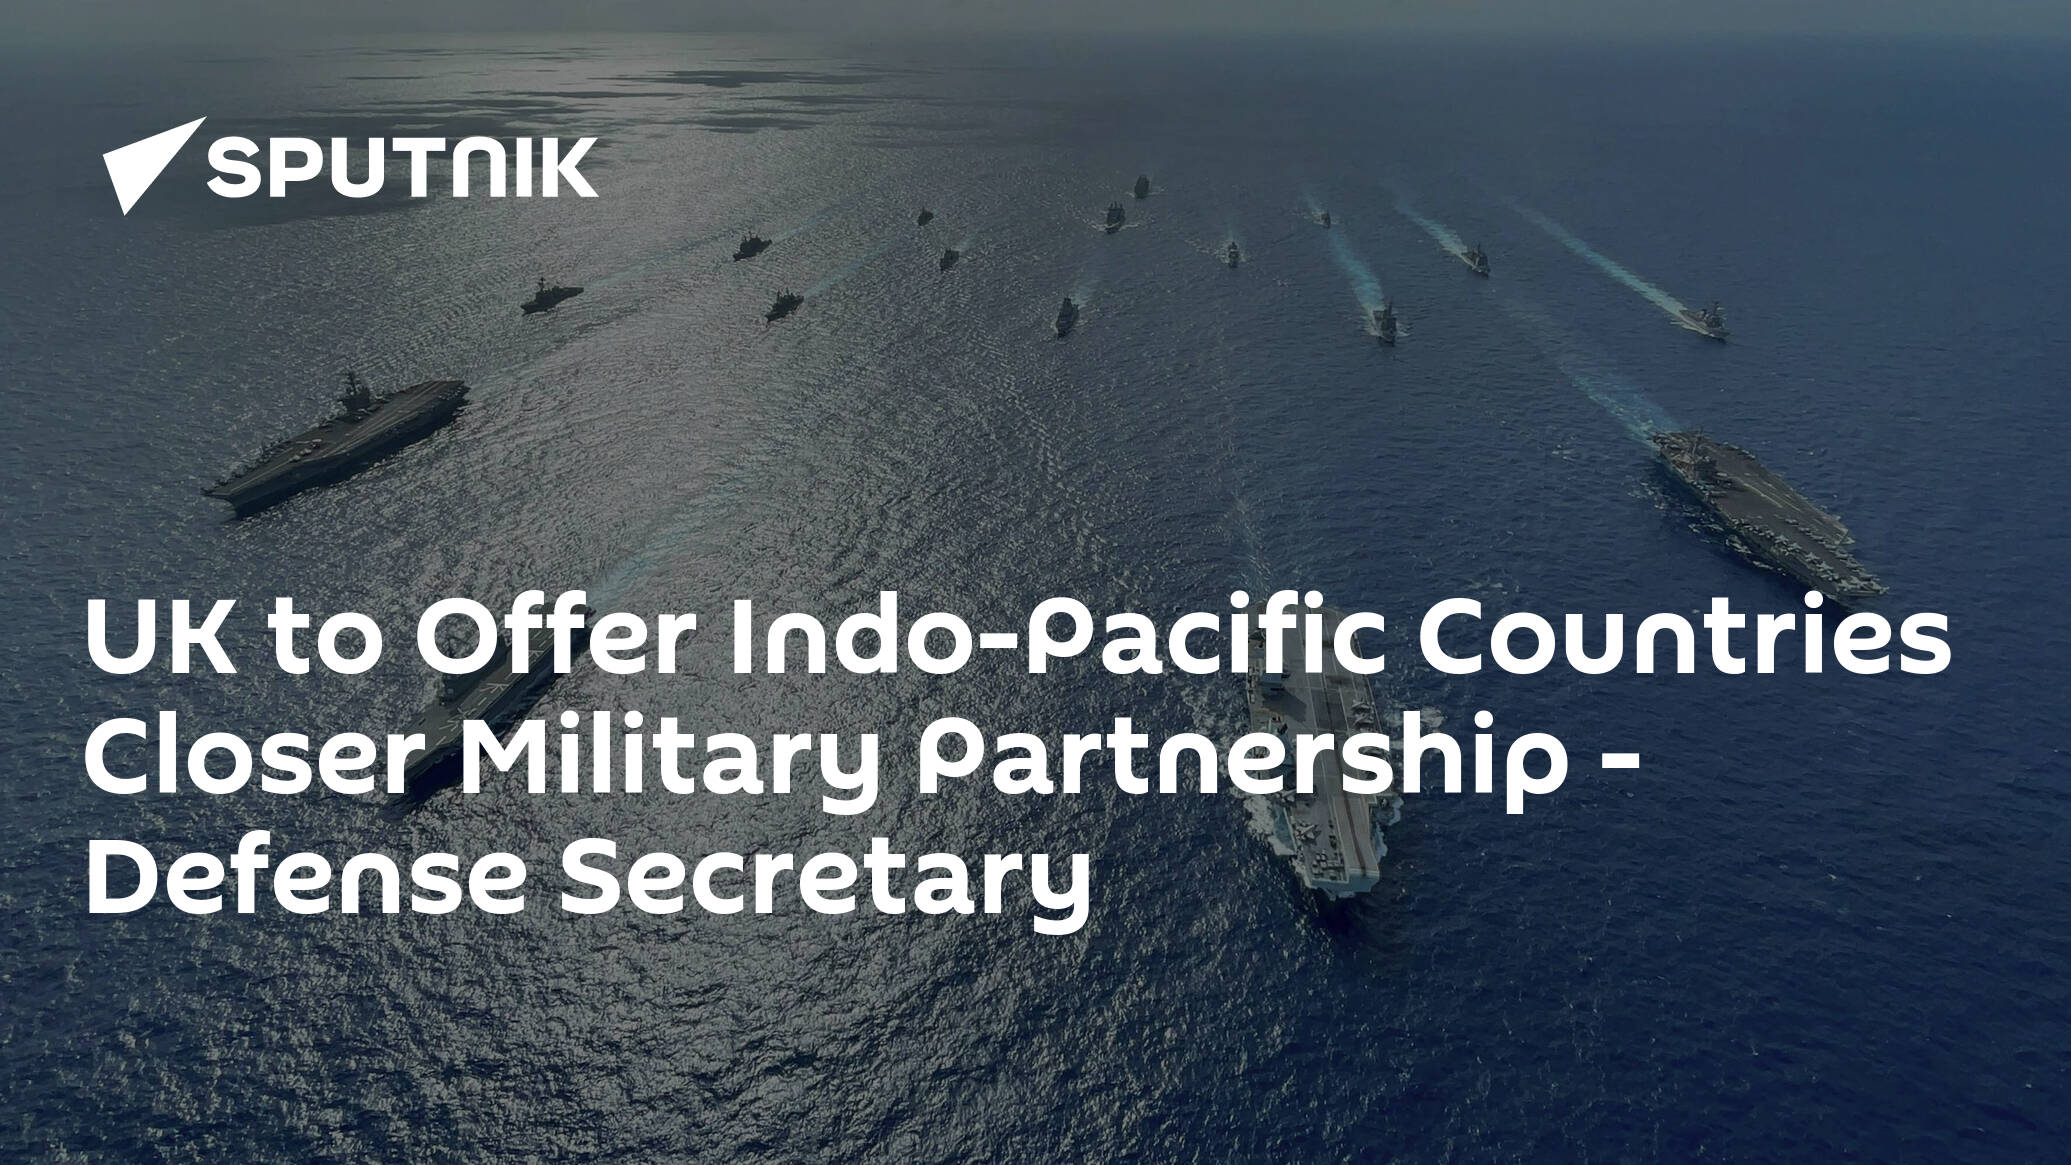 UK to Offer Indo-Pacific Countries Closer Military Partnership - Defense